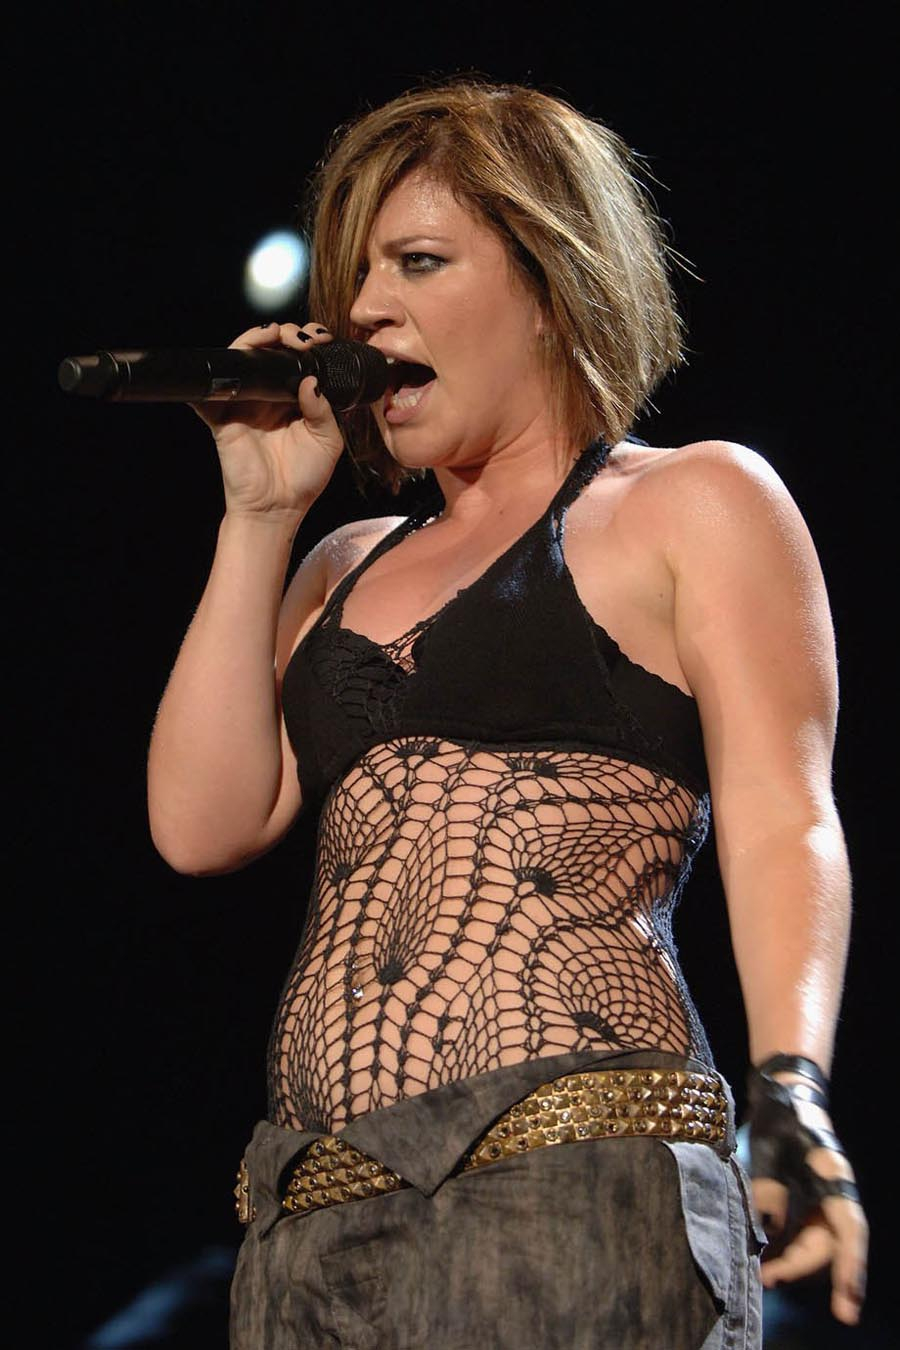 Kelly Clarkson Tattoos Pictures Images Pics Photos Of Her Tattoos for measu...